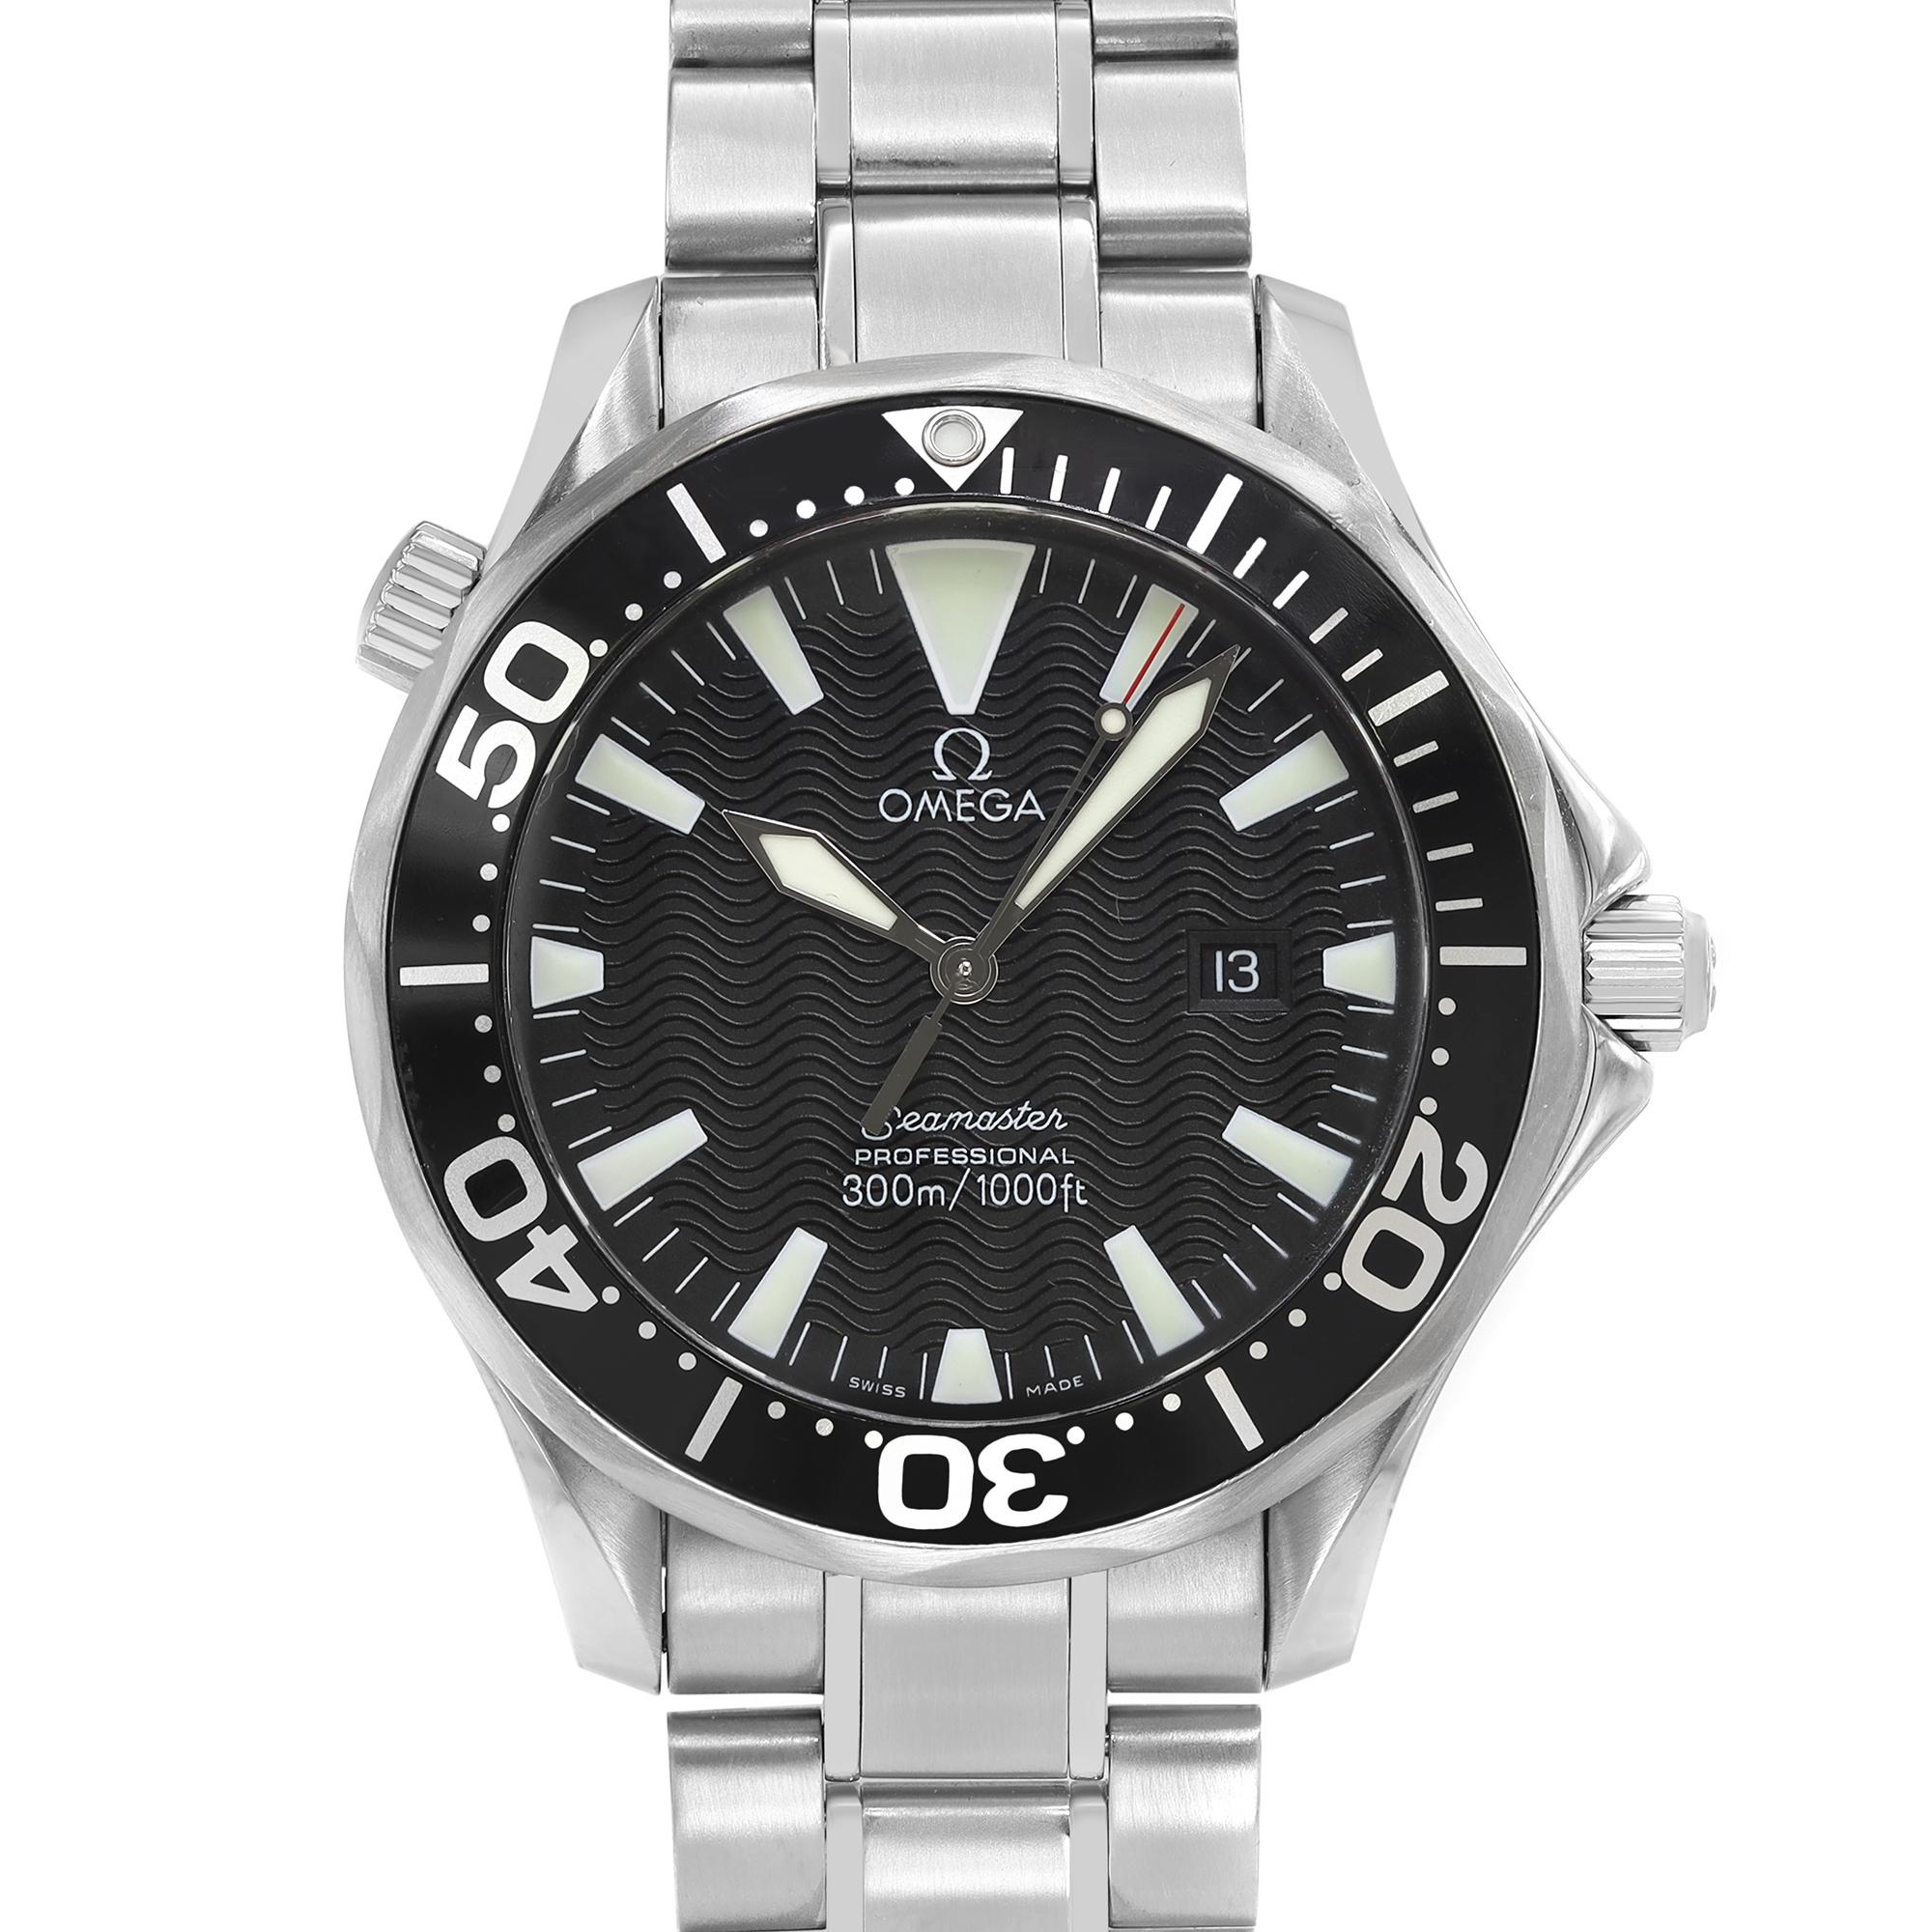 Pre-owned Omega Seamaster Stainless Steel 41mm Black Dial Men's Quartz Watch 2264.50.00. Scratch on Bezel around 12 O'clock position under closer inspection. This beautiful Timepiece is Powered by a Quartz Movement and Features: A Stainless Steel